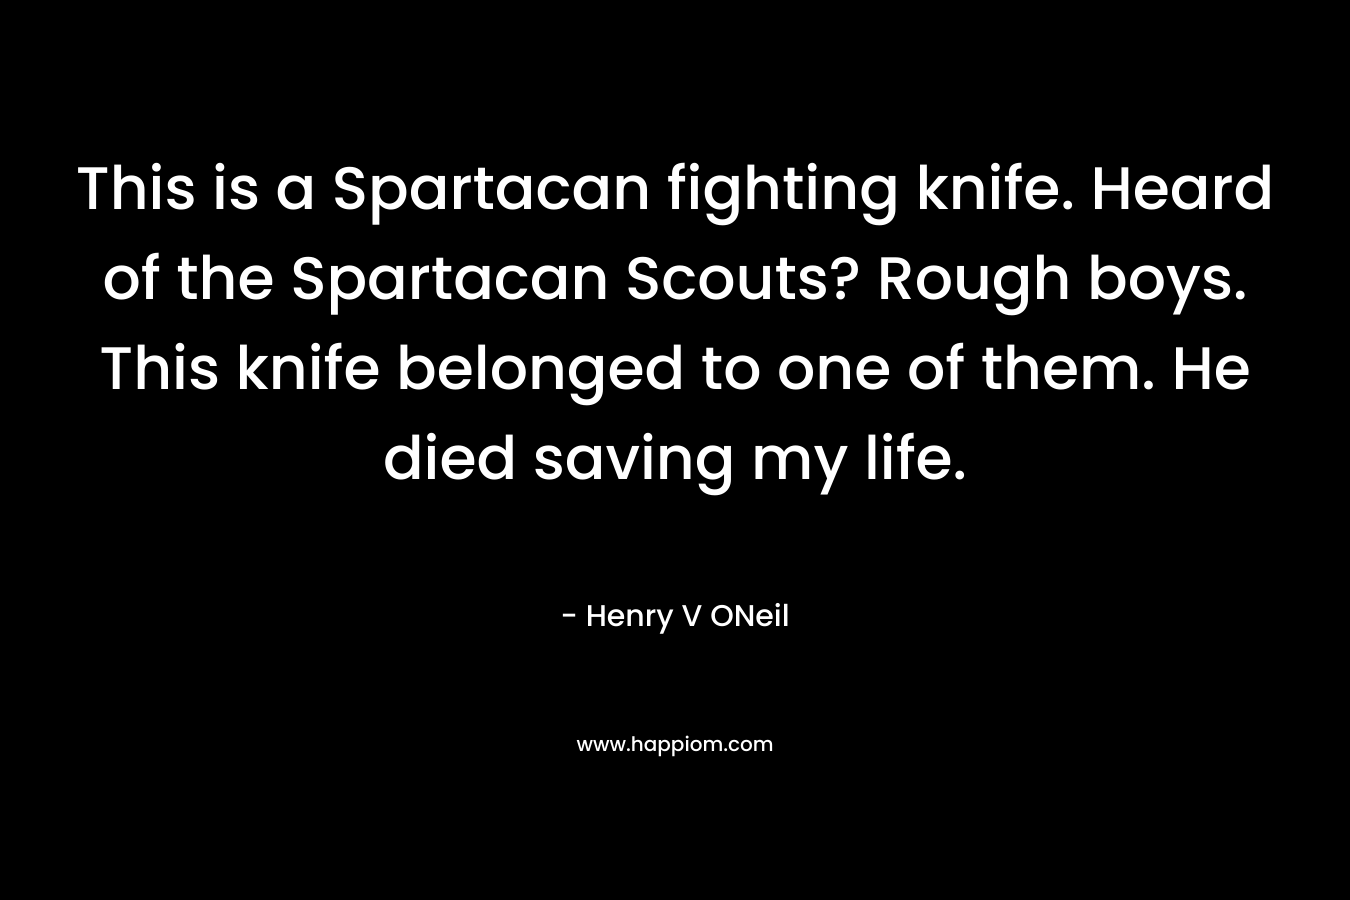 This is a Spartacan fighting knife. Heard of the Spartacan Scouts? Rough boys. This knife belonged to one of them. He died saving my life. – Henry V ONeil